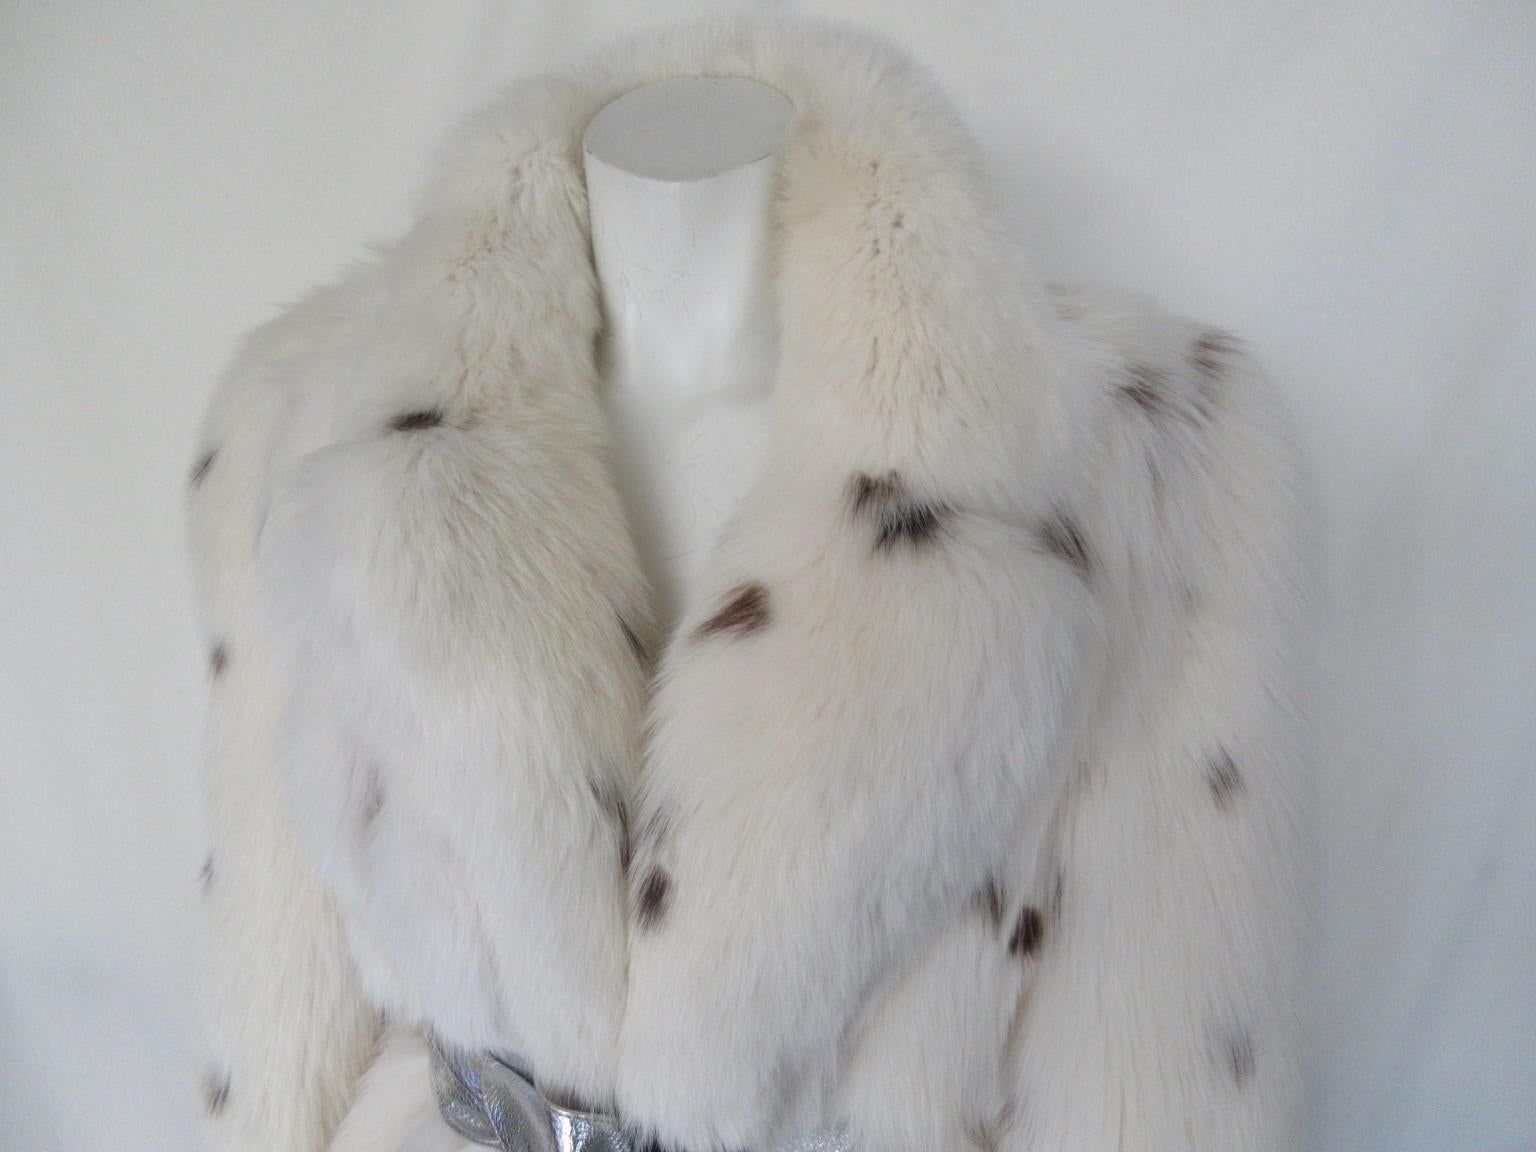 Exclusive SAGA Scandinavian Fox fur long coat made for Jindo, New York- Paris-London- Milan.

We offer more exclusive fur items. view our frontstore

 Details:
The coat is snow white with black spots in Lynx style
With 2 pockets and 3 closing hooks